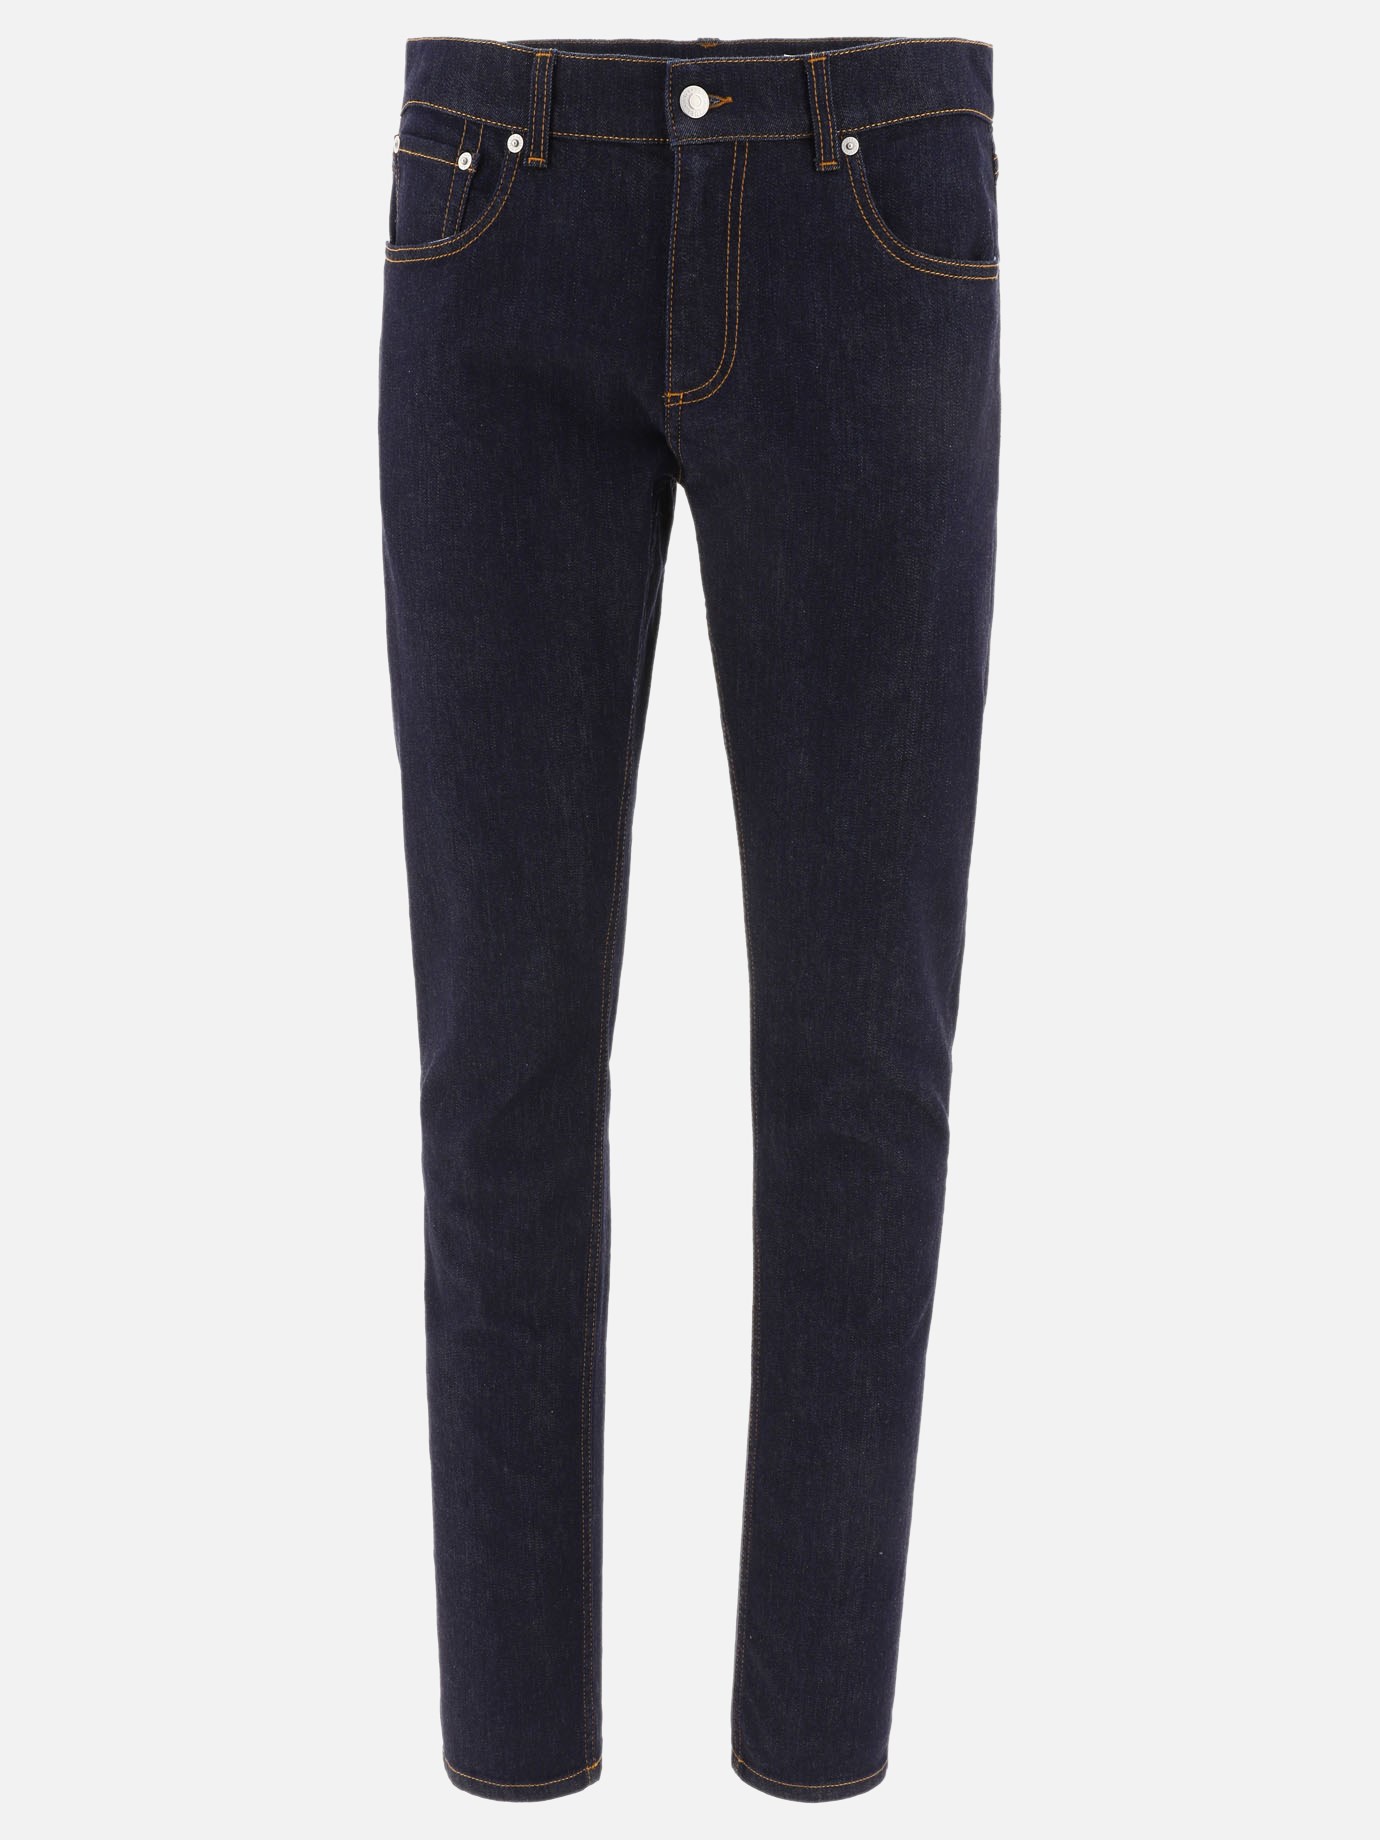 Jeans with embroideryby Alexander McQueen - 5